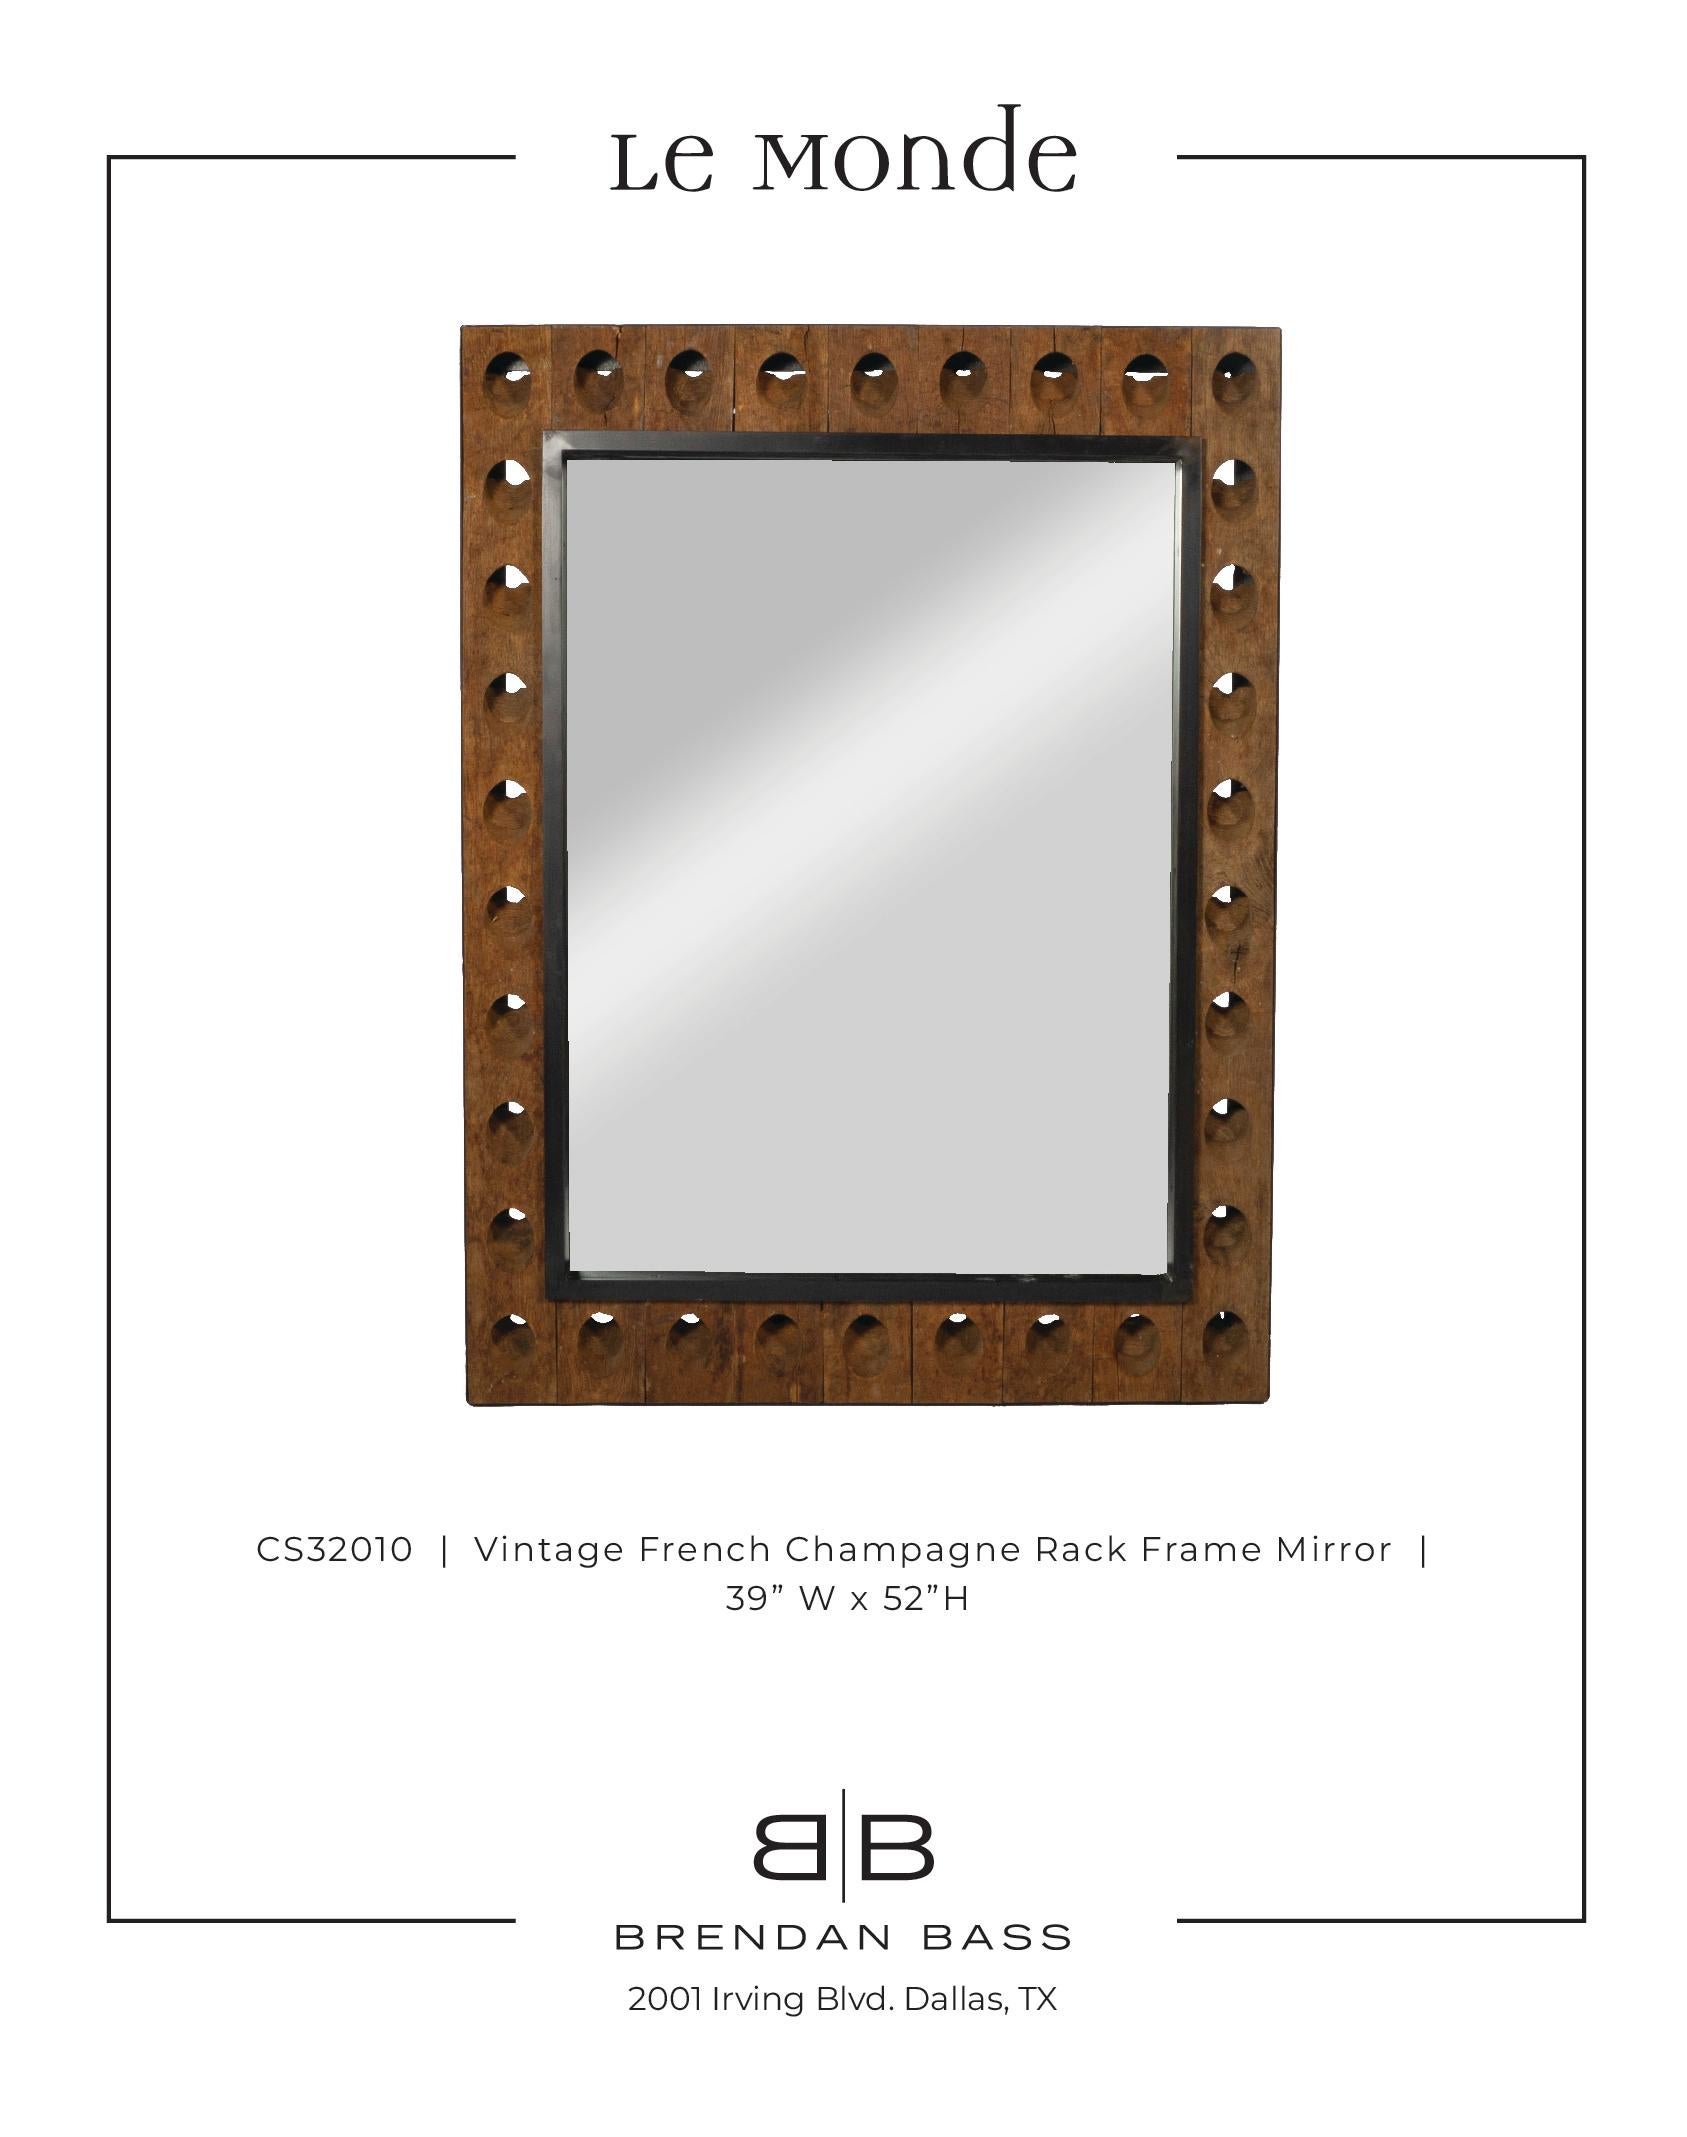 Organic Modern Mirror with Frame Made from Vintage French Champagne Rack For Sale